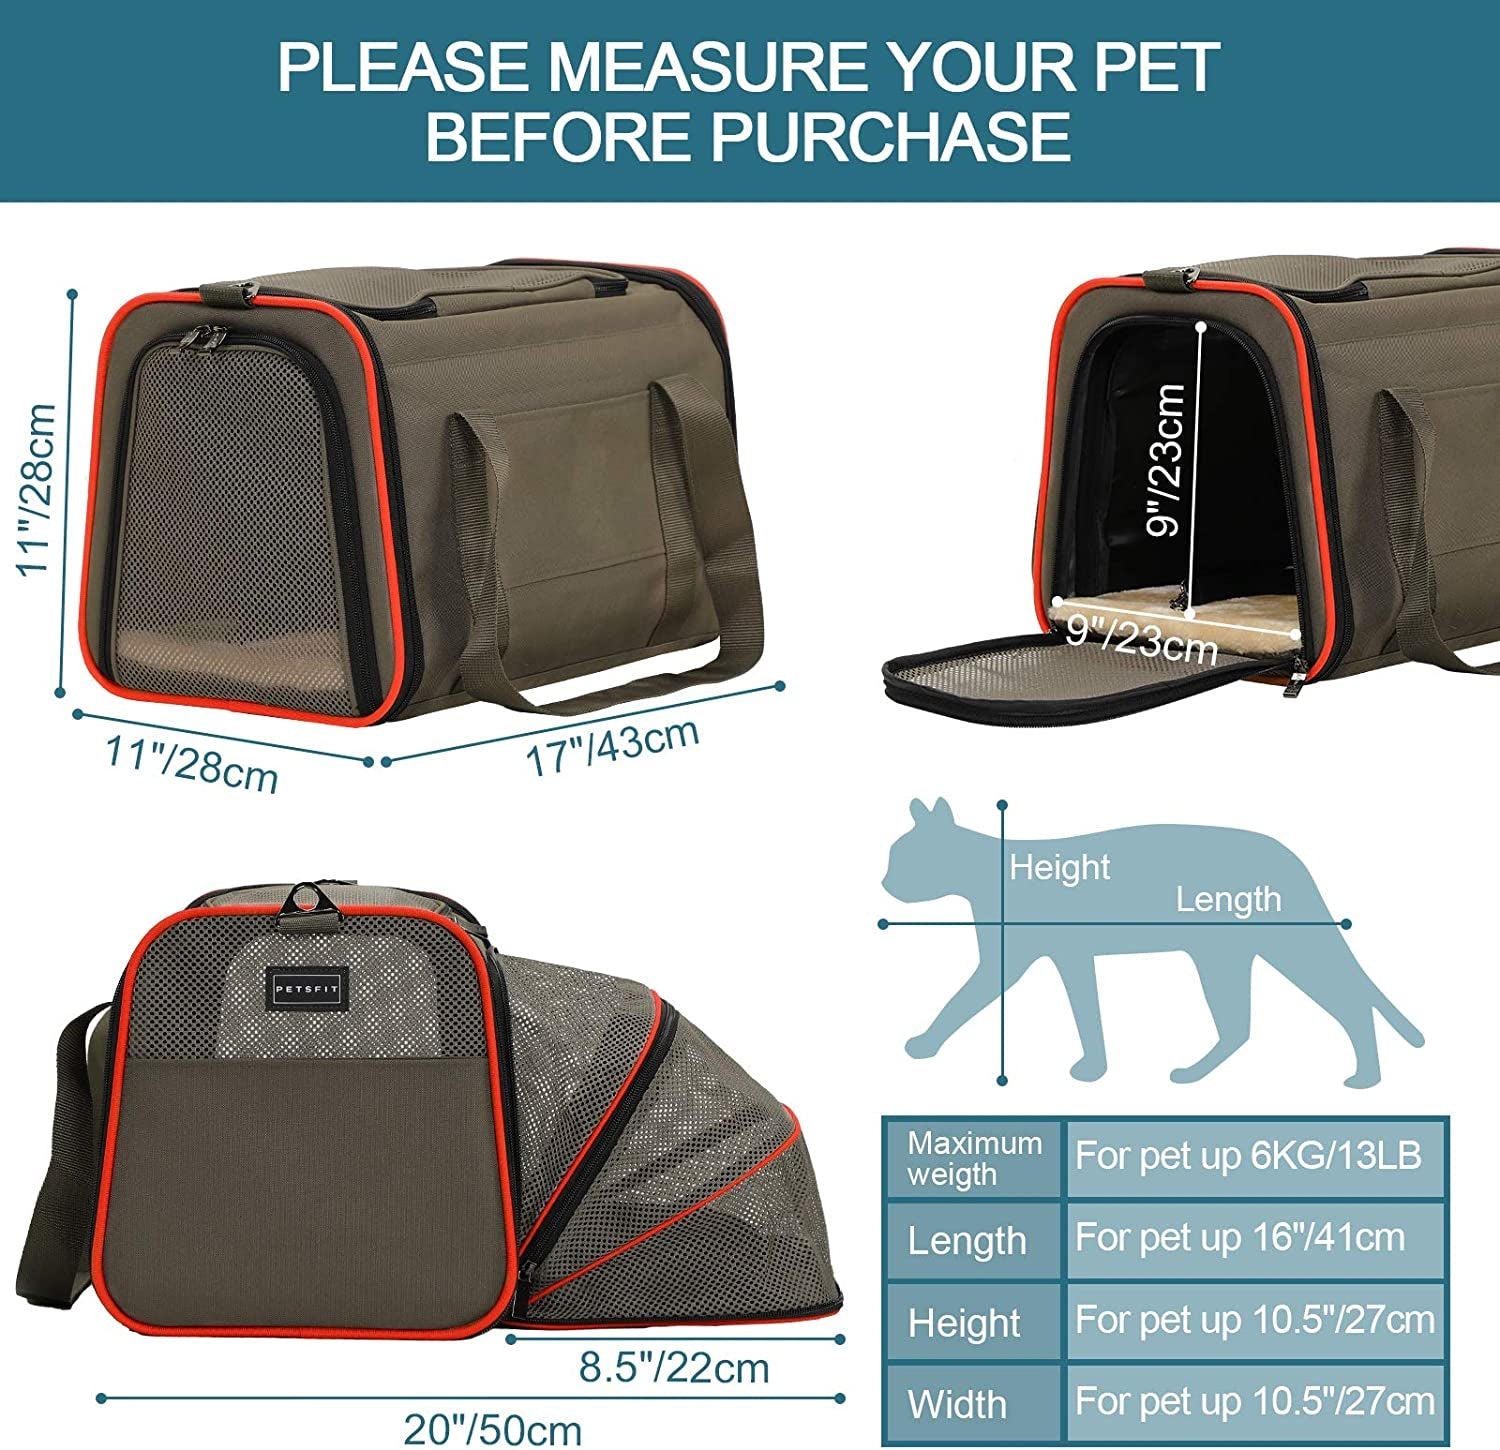 Expandable Cat Carrier Dog Carriers,Airline Approved Soft-Sided Portable Pet Travel Washable Carrier for Kittens,Puppies,Removable Soft Plush Mat and Pockets,Locking Safety Zippers - PETGS